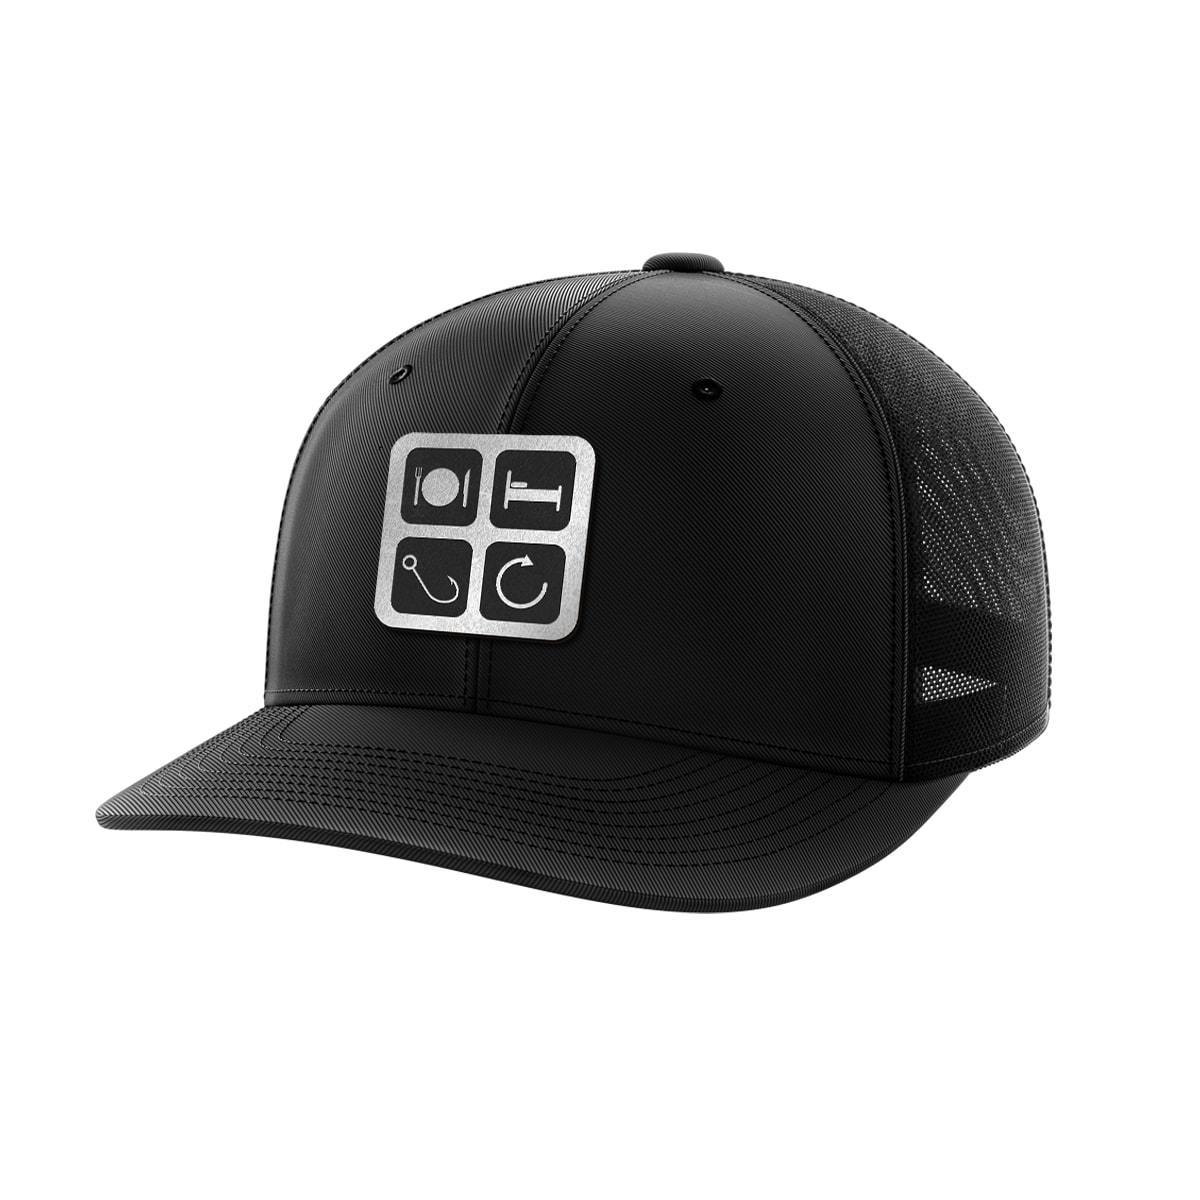 Eat Sleep Fish Repeat Black Patch Hat - Greater Half